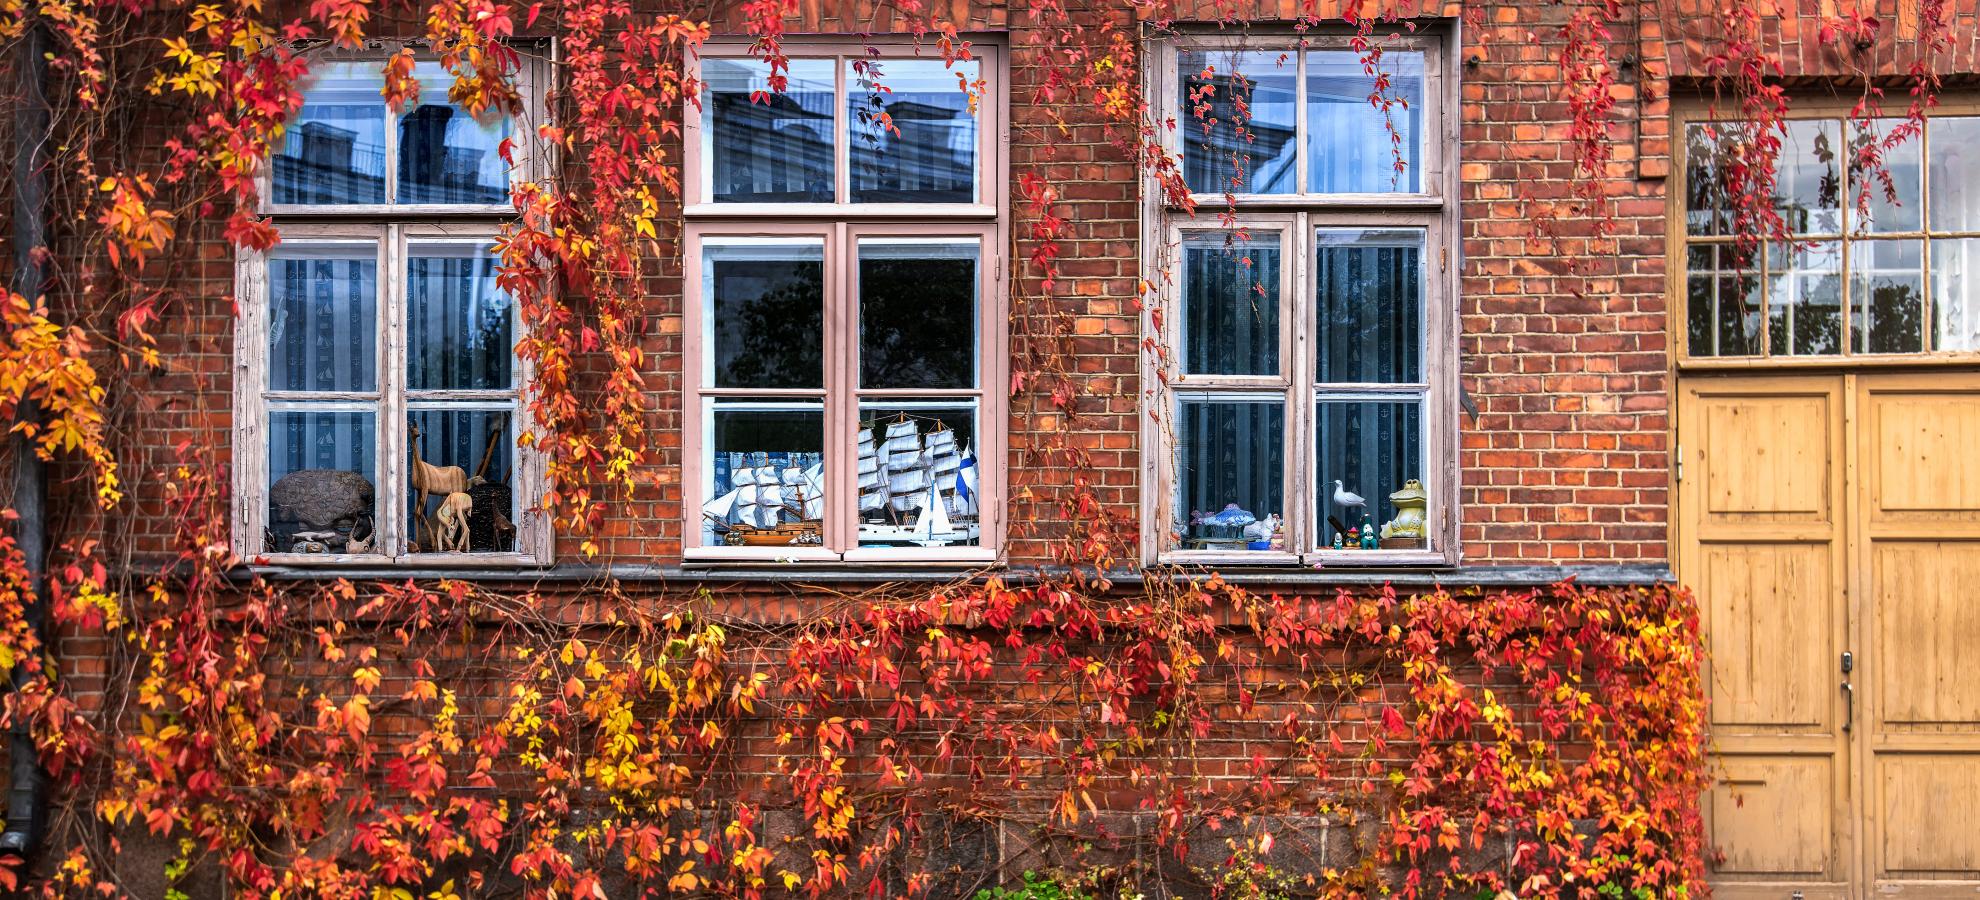 Side of a red-brick building on Suomenlinna, with 3 tall windows and a wooden double door to their right. Trailing vines underneath, from above and up the wall to the left are full of red and gold autumnal coloured leaves.